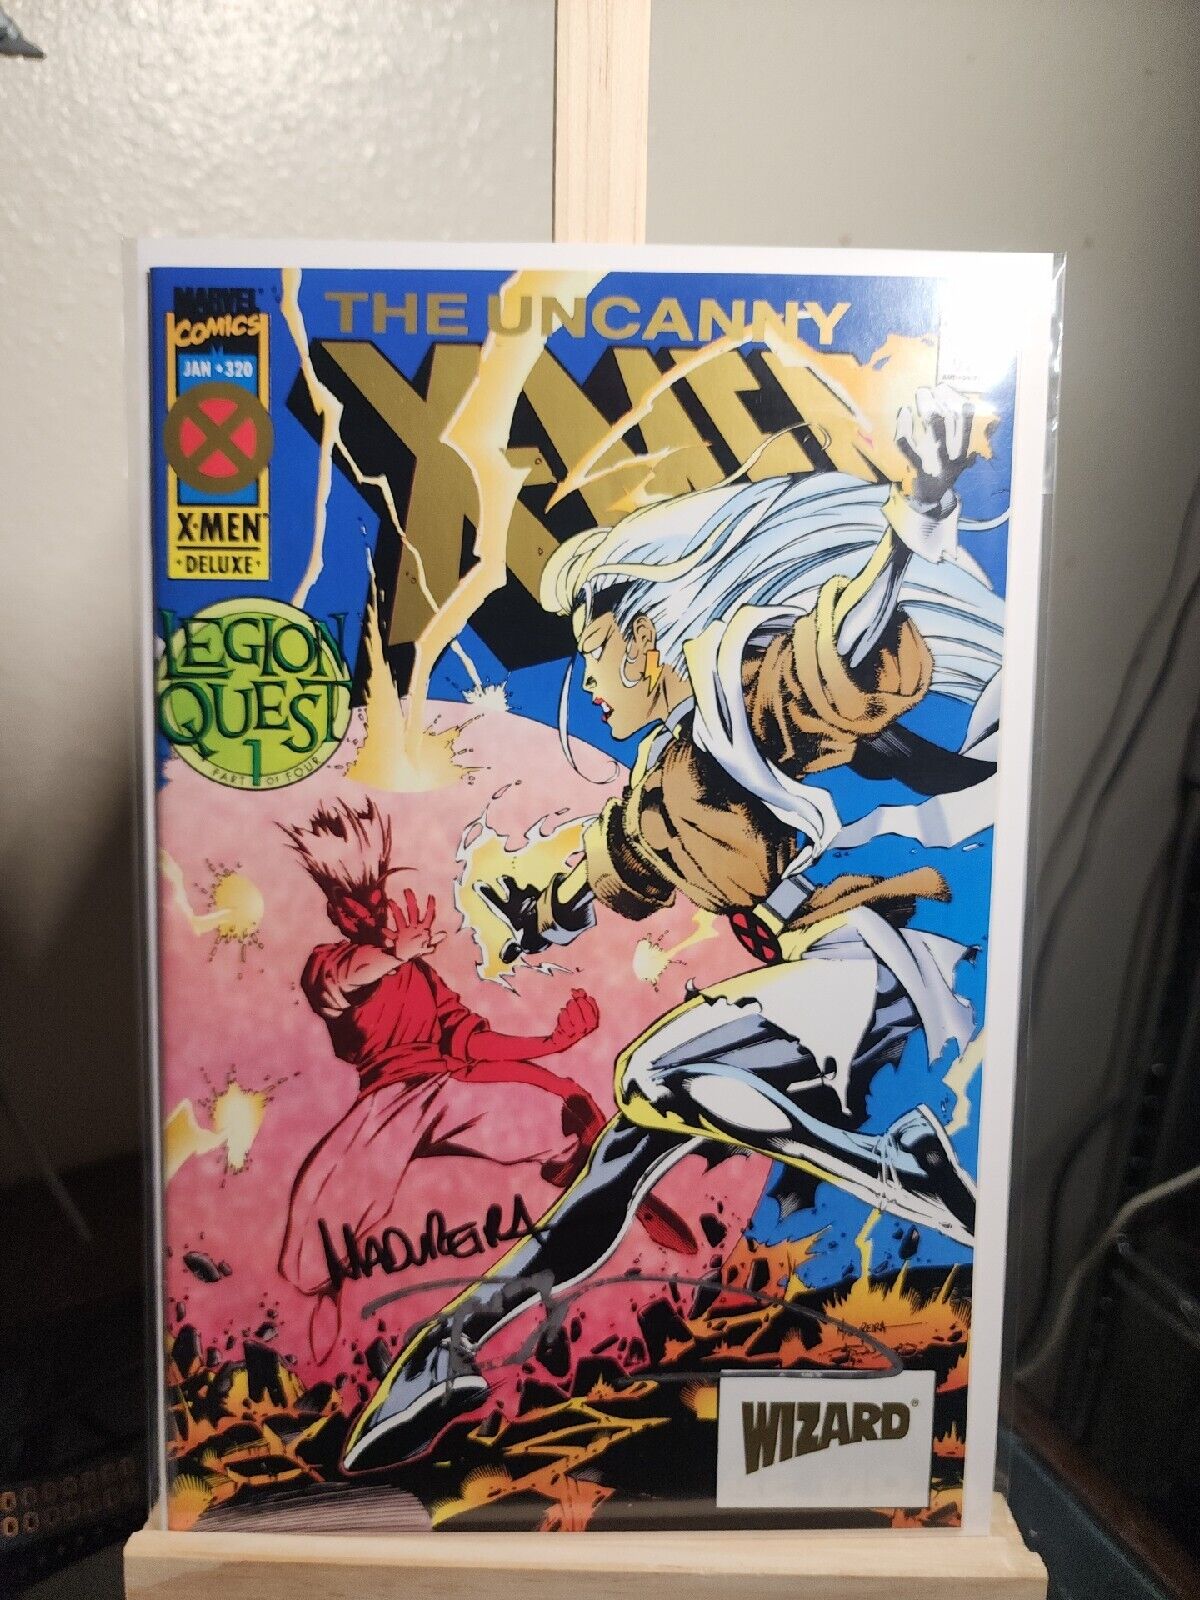 The Uncanny X-men 320 Wizard Gold Edition Signed By Joe Madureira And Townsend. 